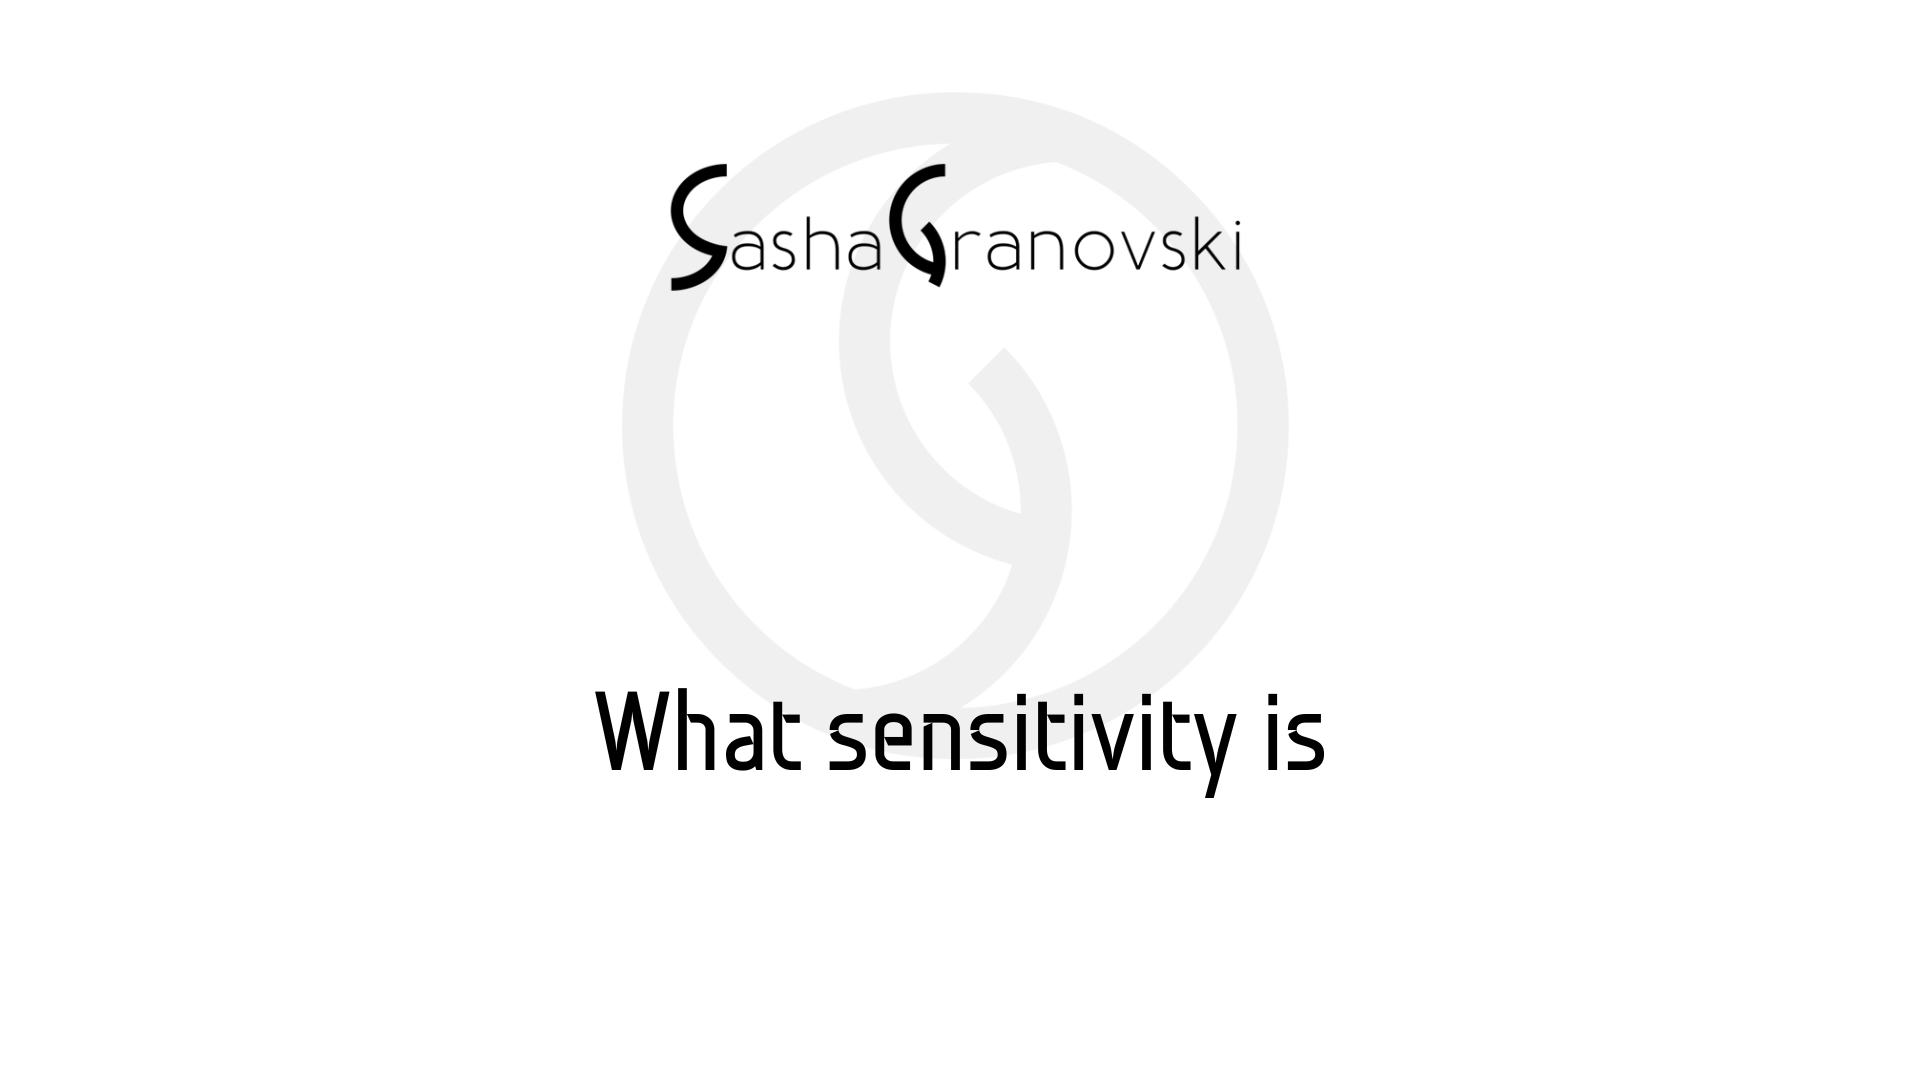 What sensitivity is and why we need it